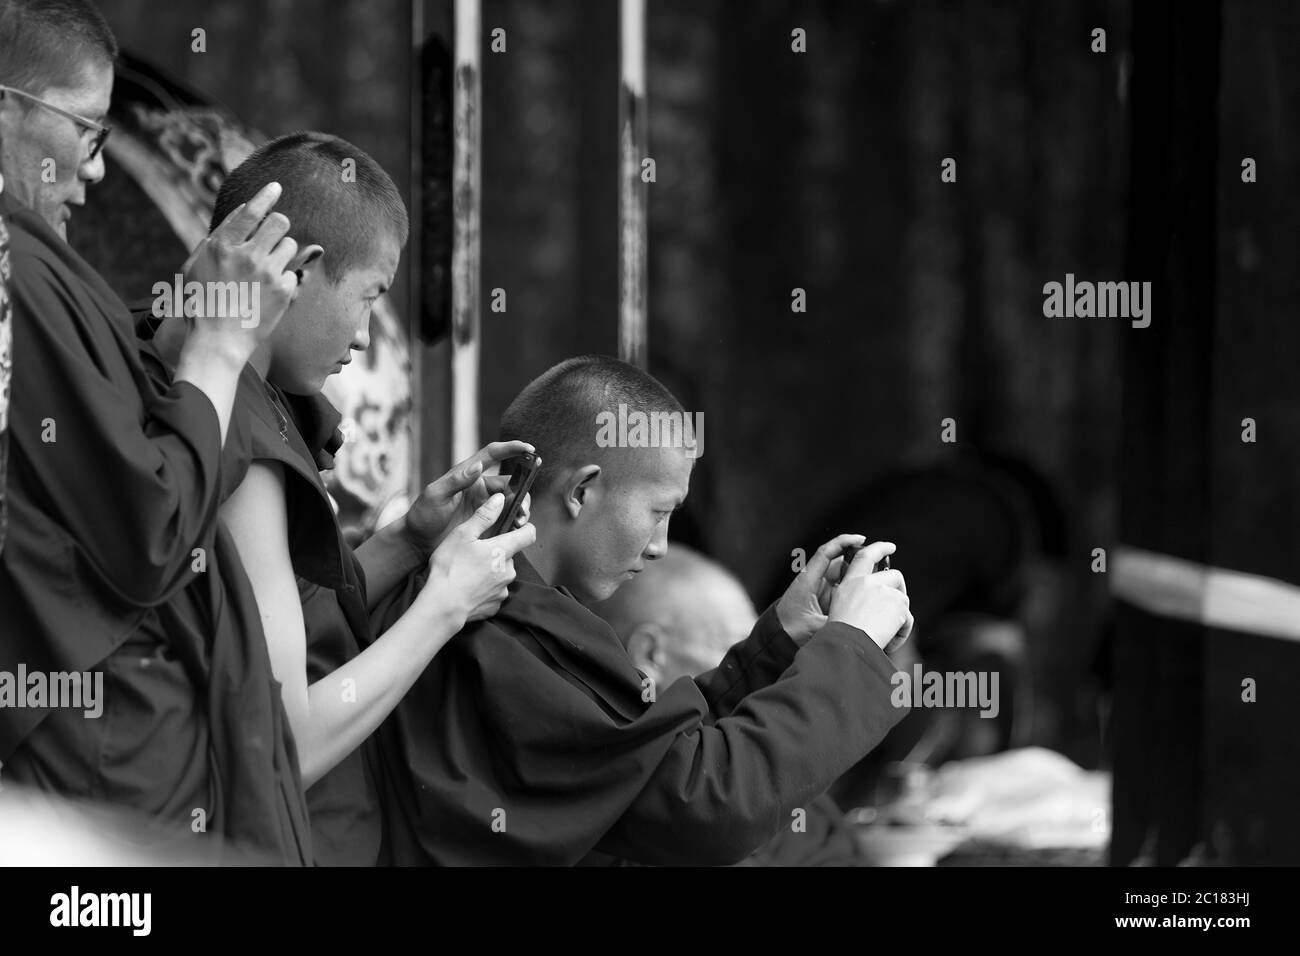 Young monks take photos of the sacred cham dance on their cell phones, Tsurphu, Tibet Stock Photo